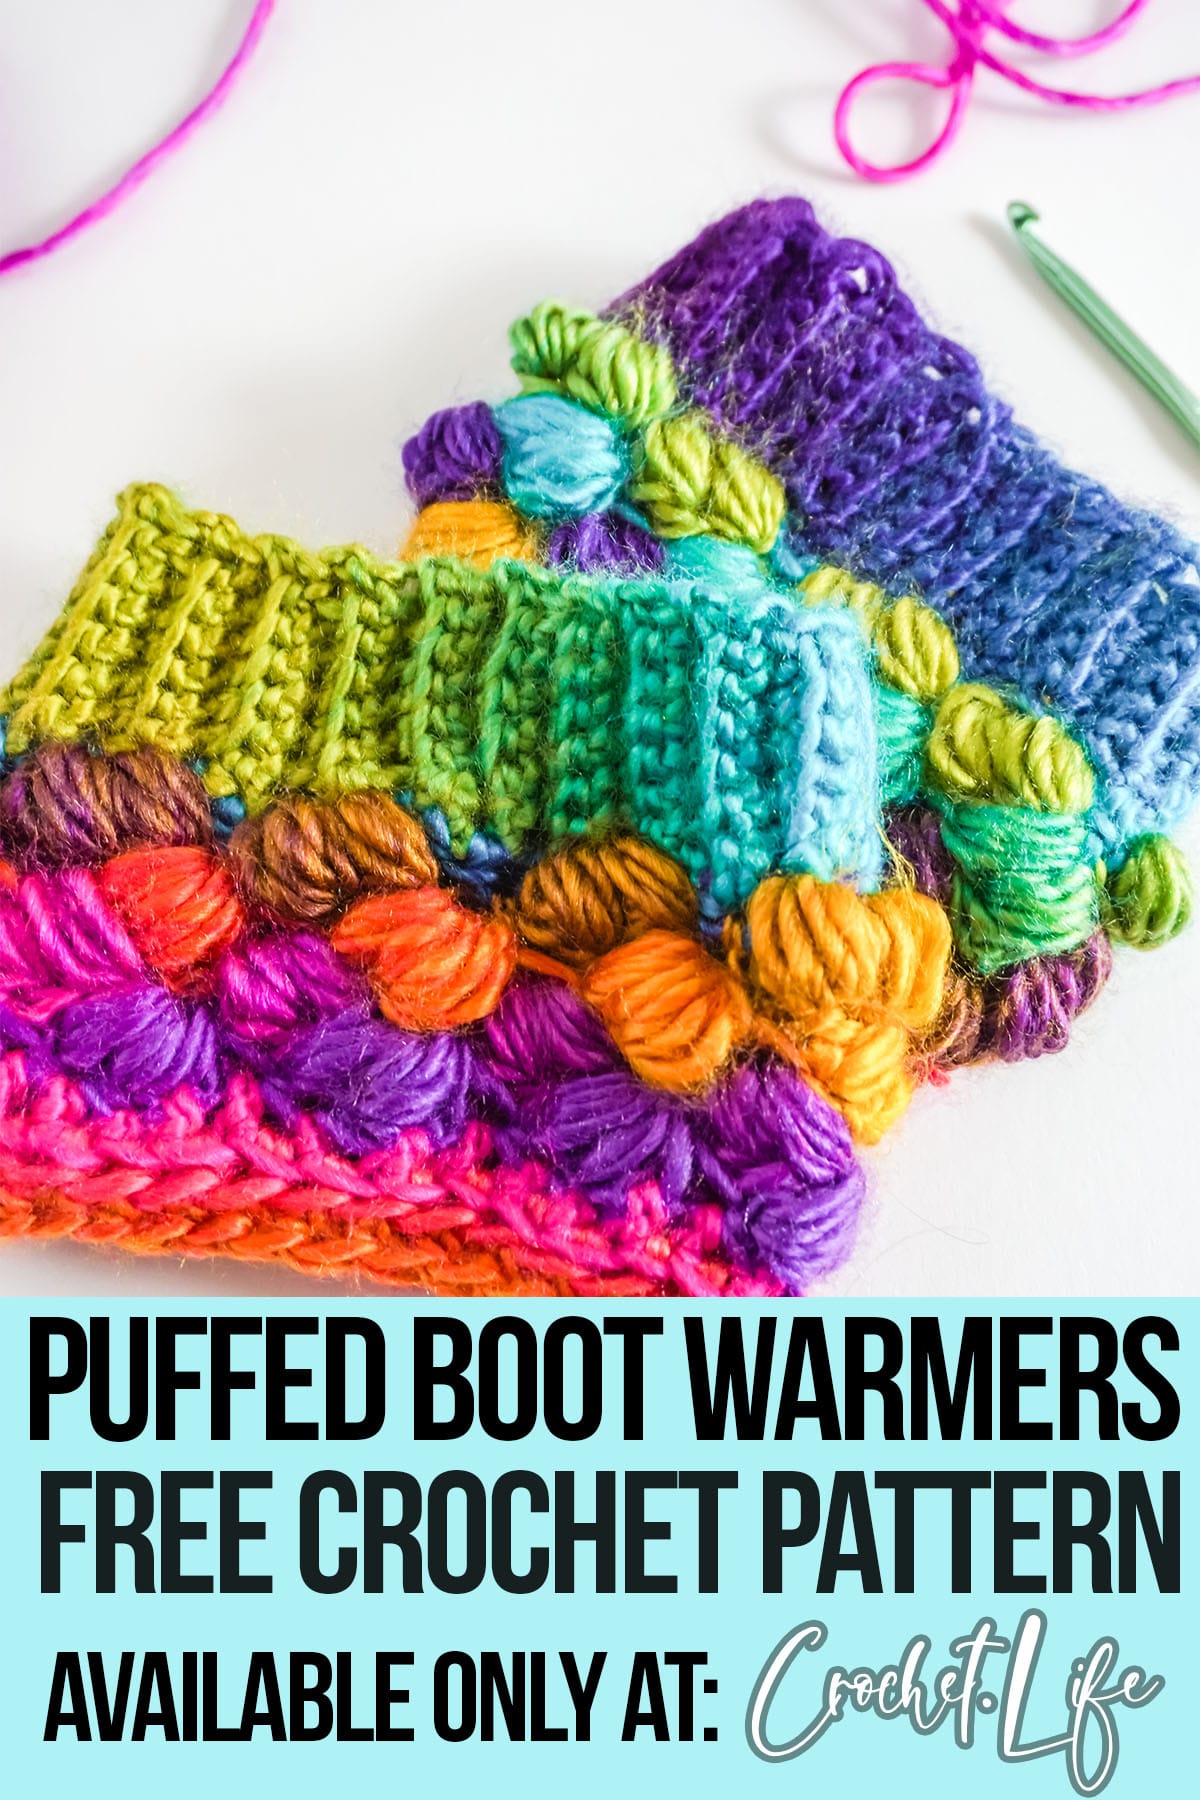 easy winter boot cuff crochet pattern with text which reads puffed boot warmers free crochet pattern available only at crochet.life